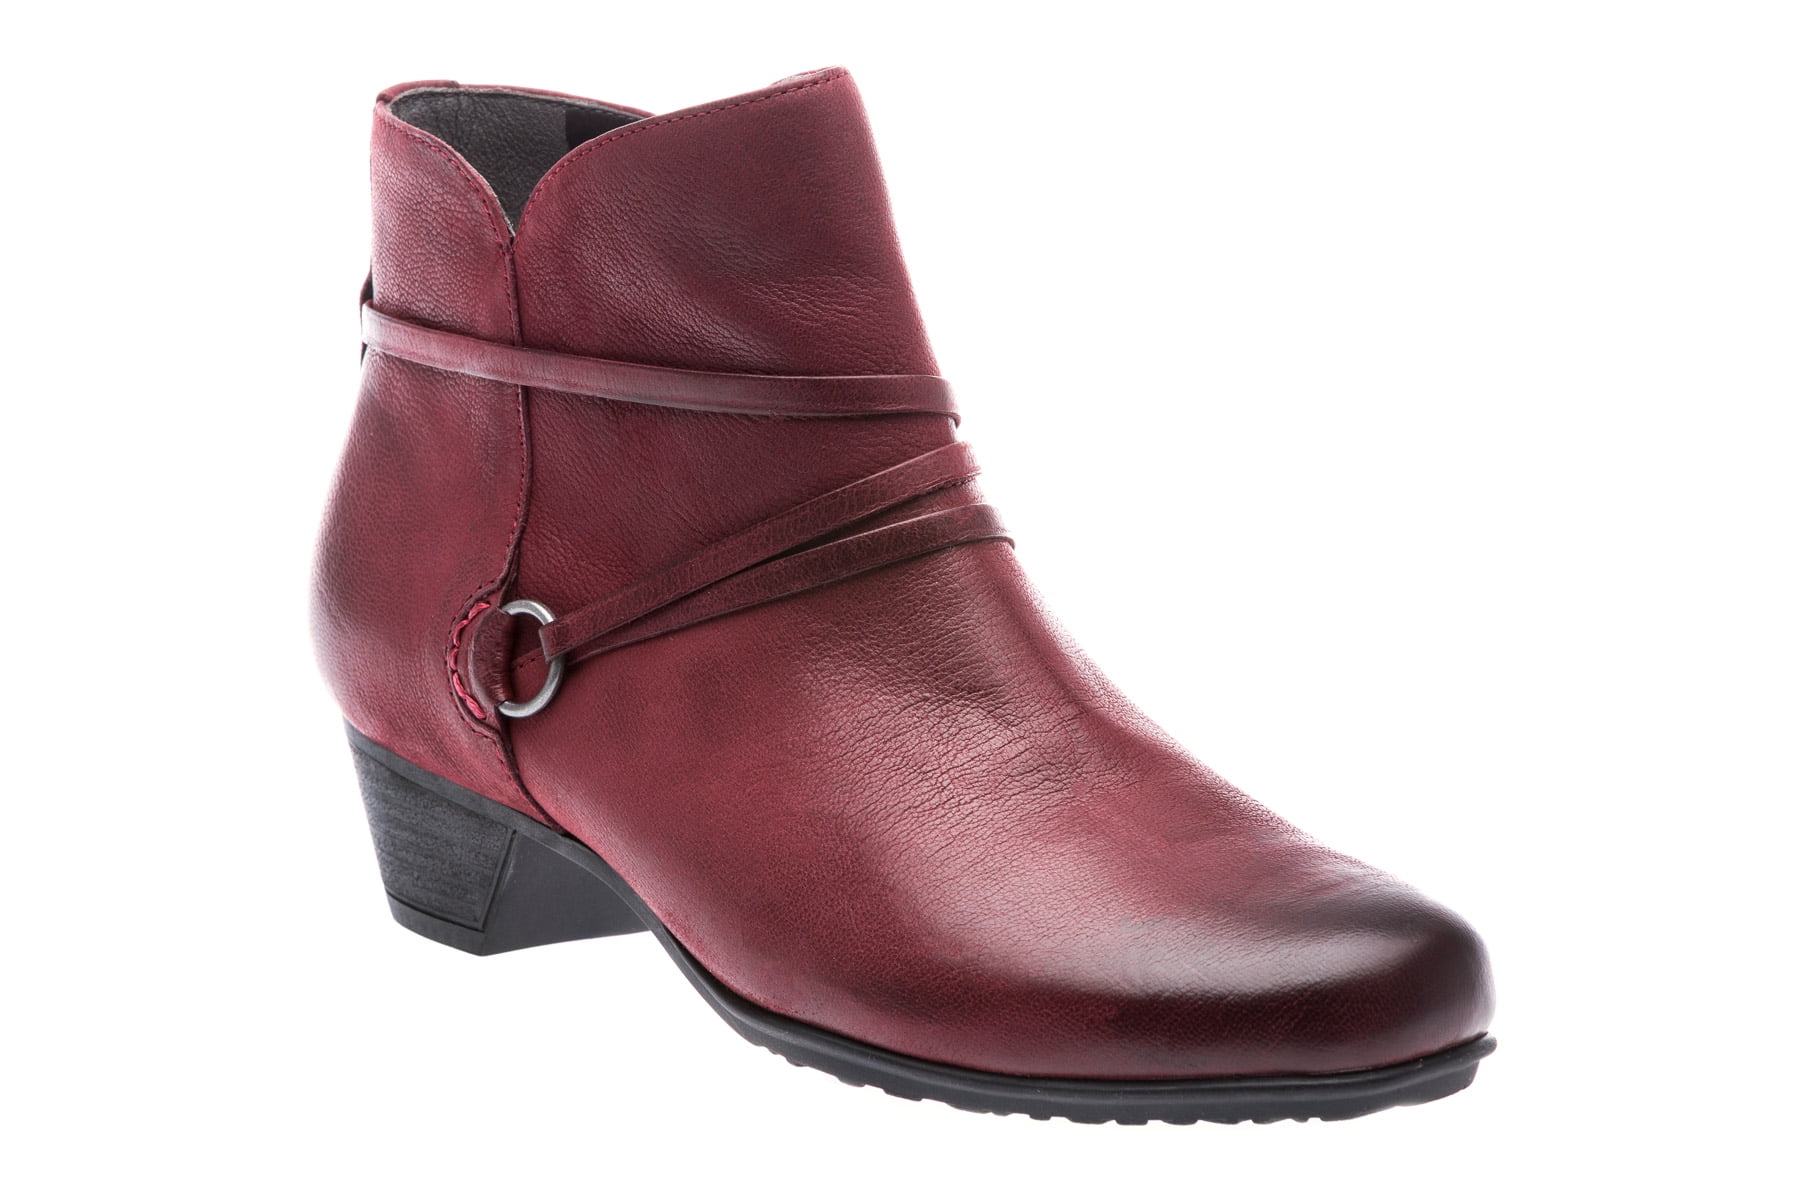 abeo boots on sale